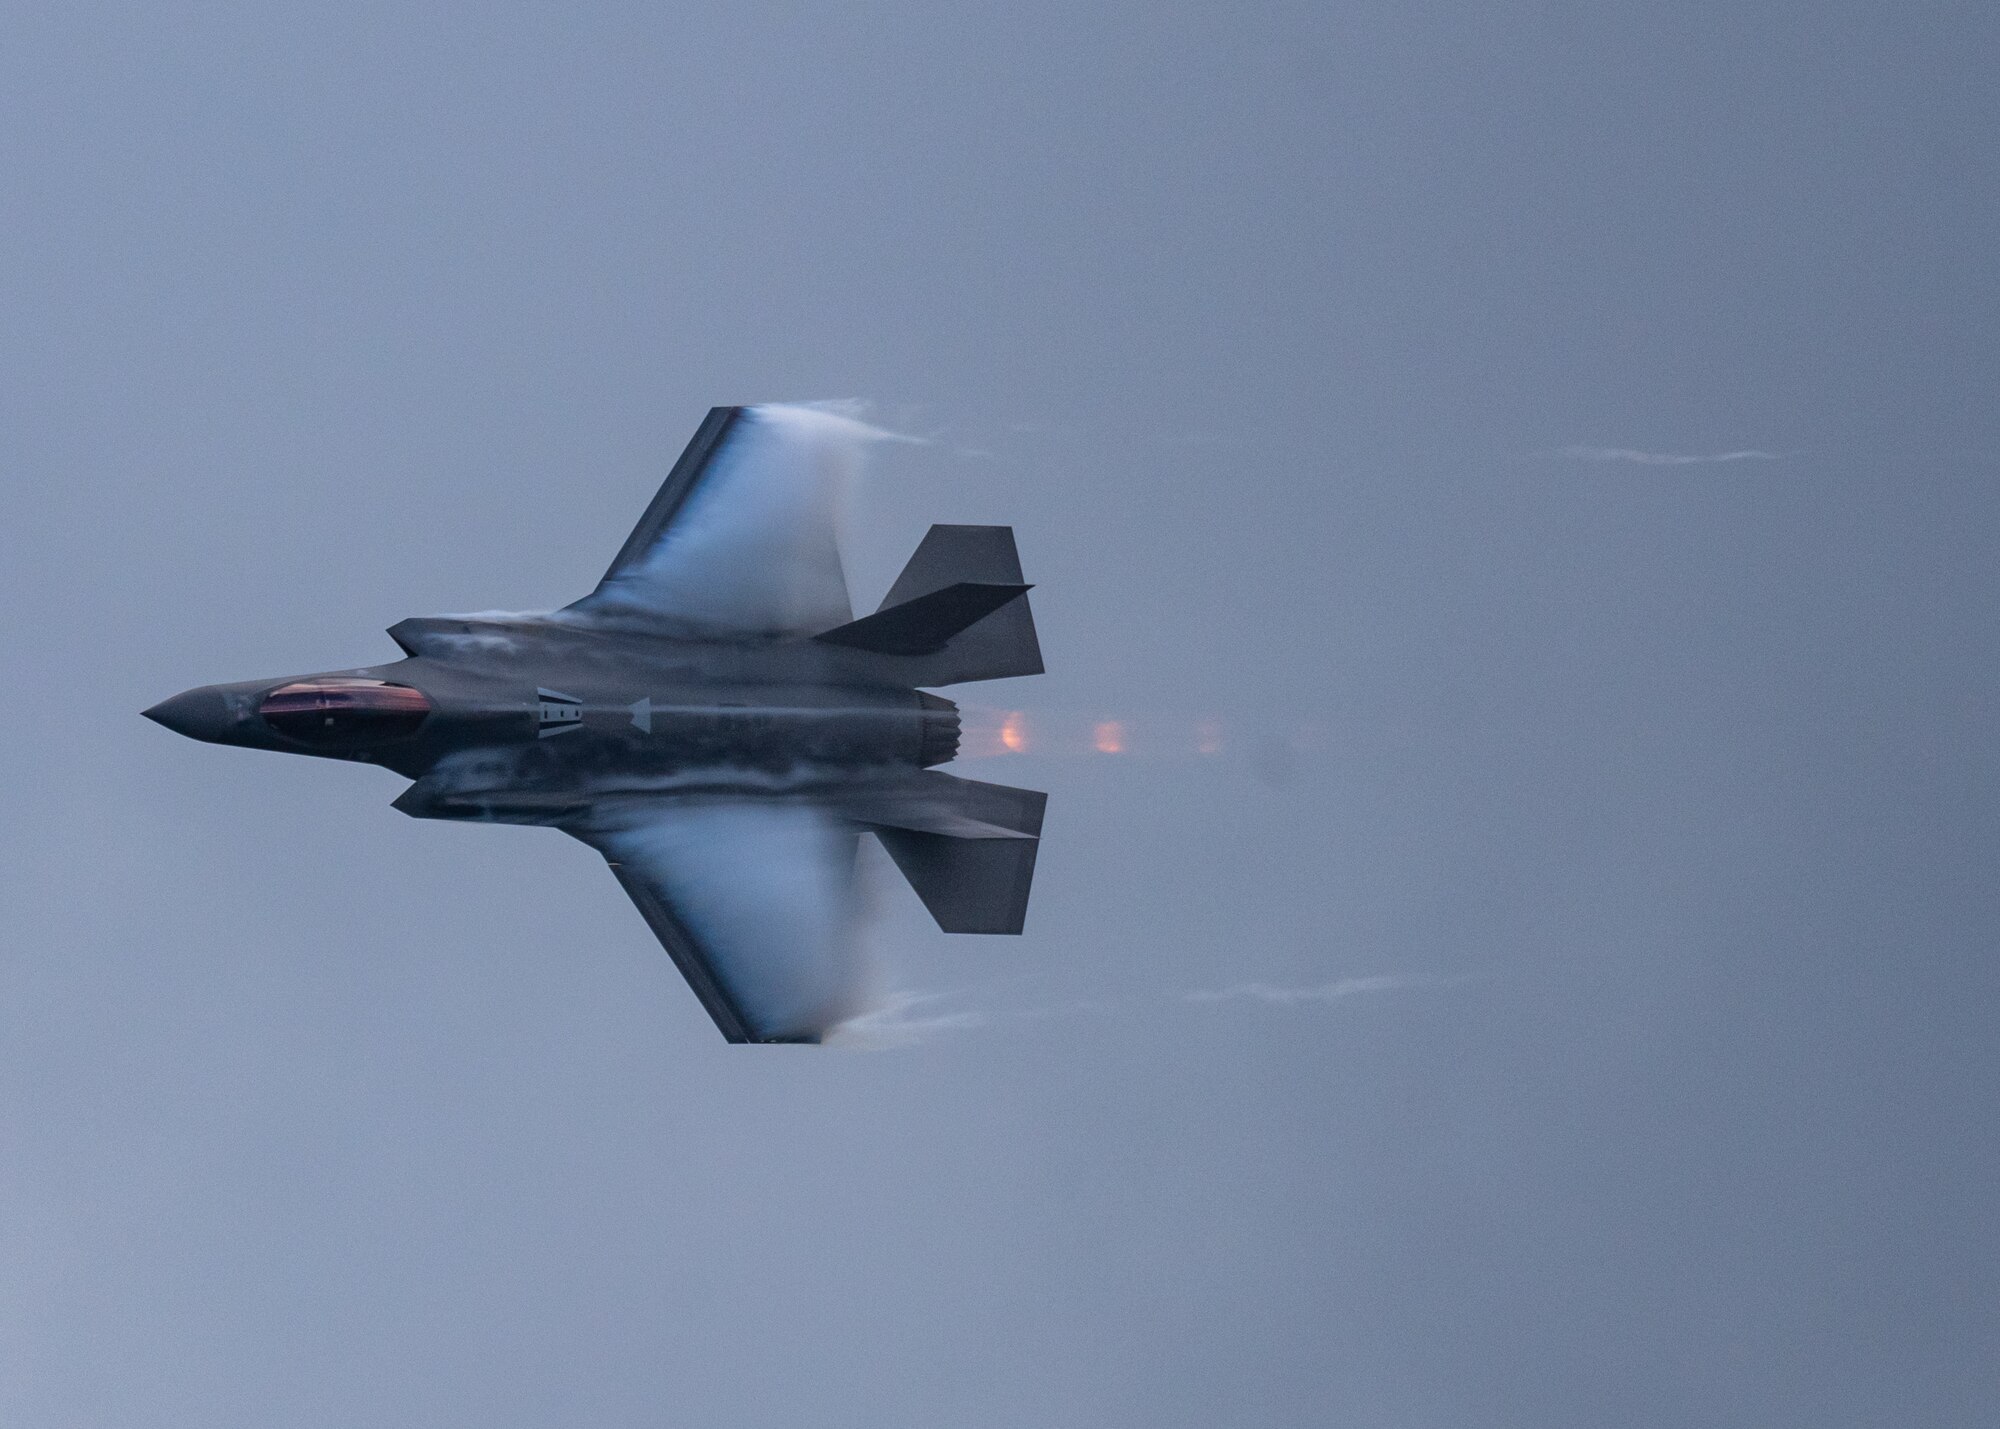 An F-35 from the F-35 Demonstration Team flies through the sky.